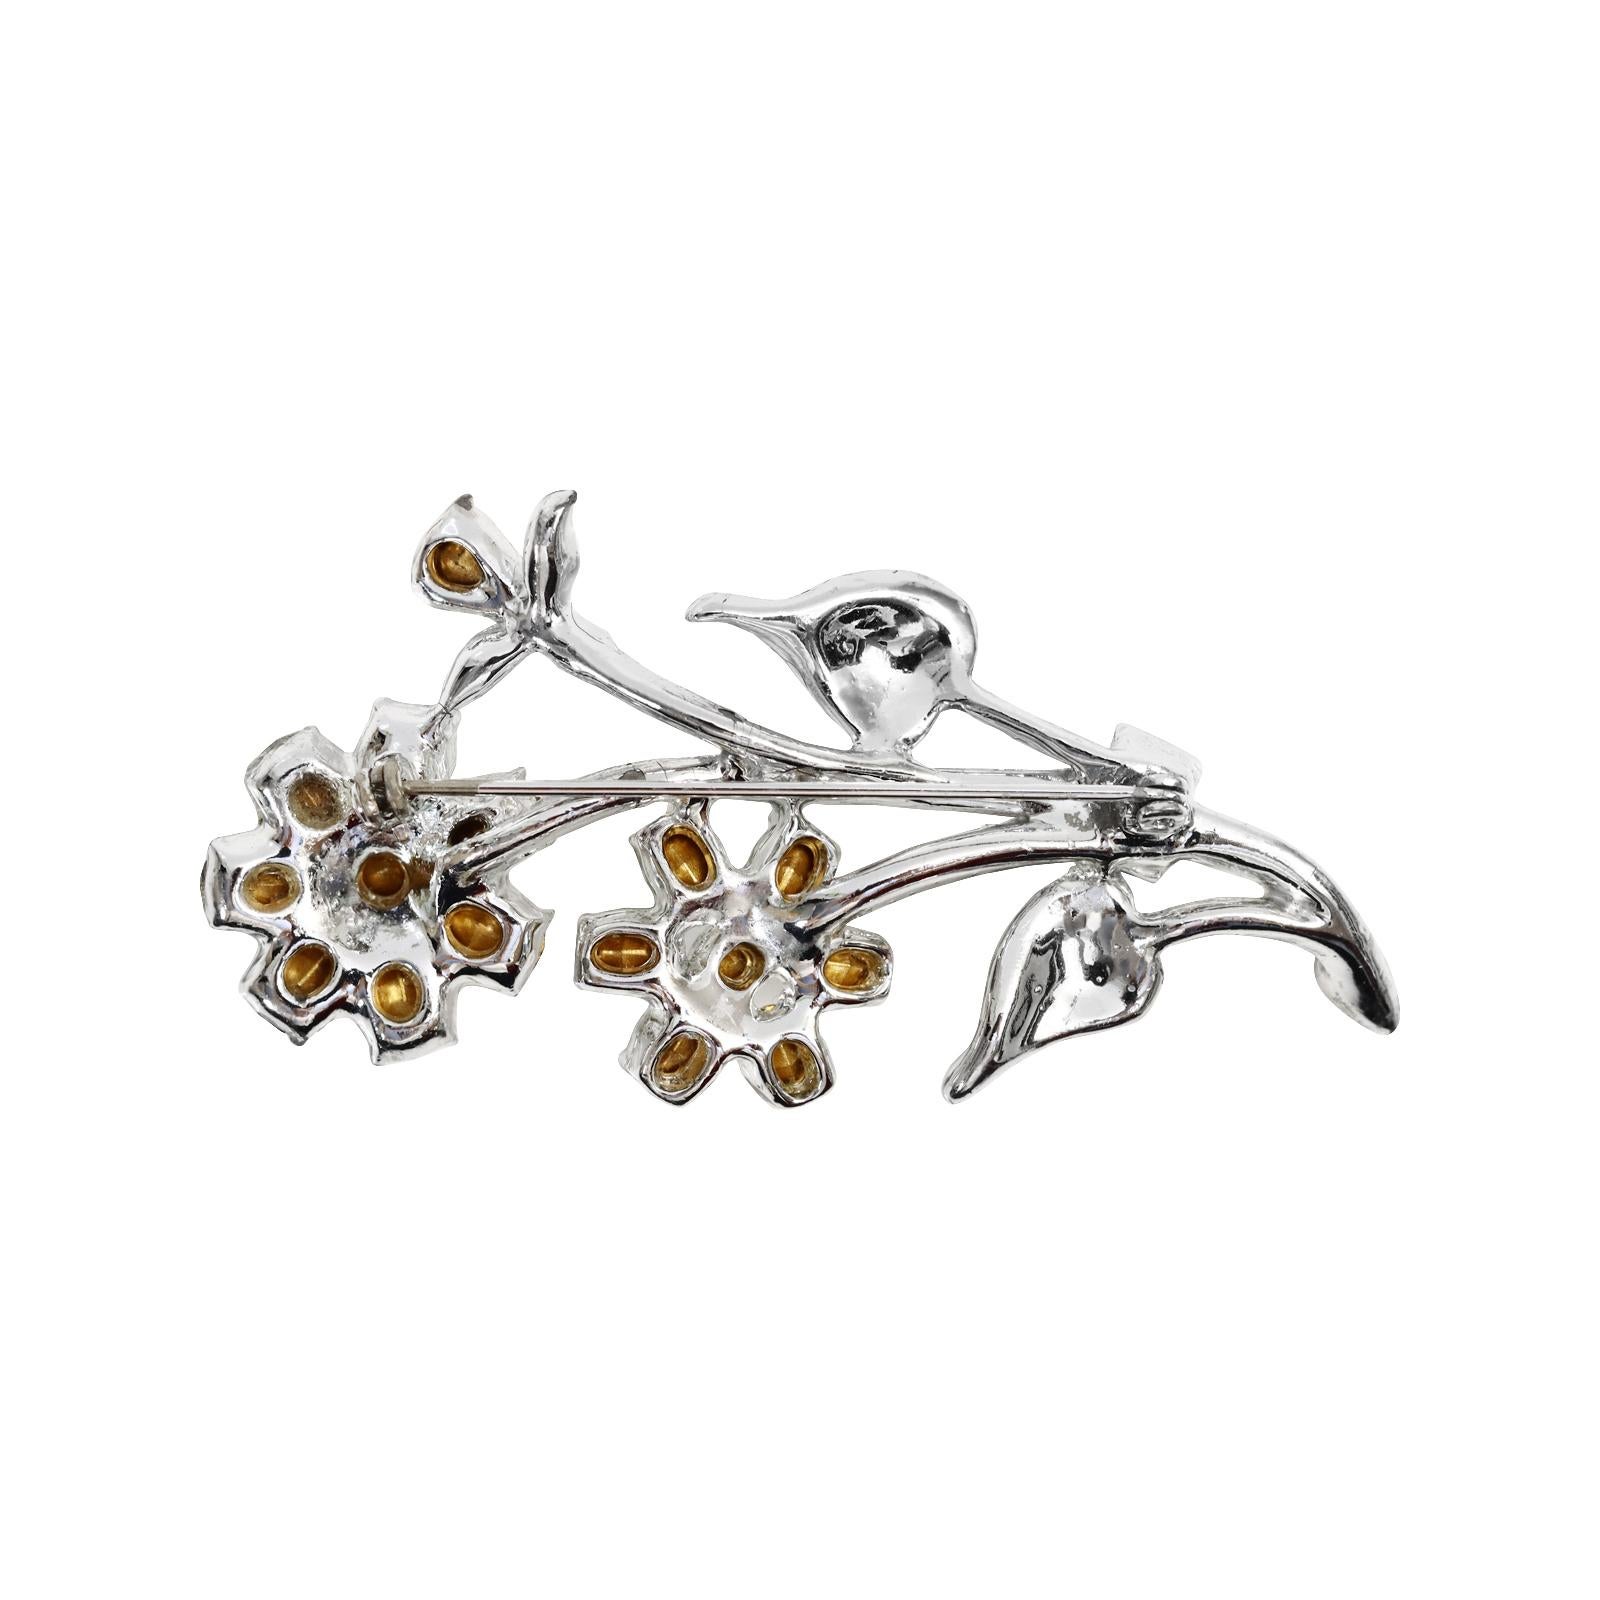 Vintage Rhinestone Flower Brooch Circa 1960s In Good Condition For Sale In New York, NY